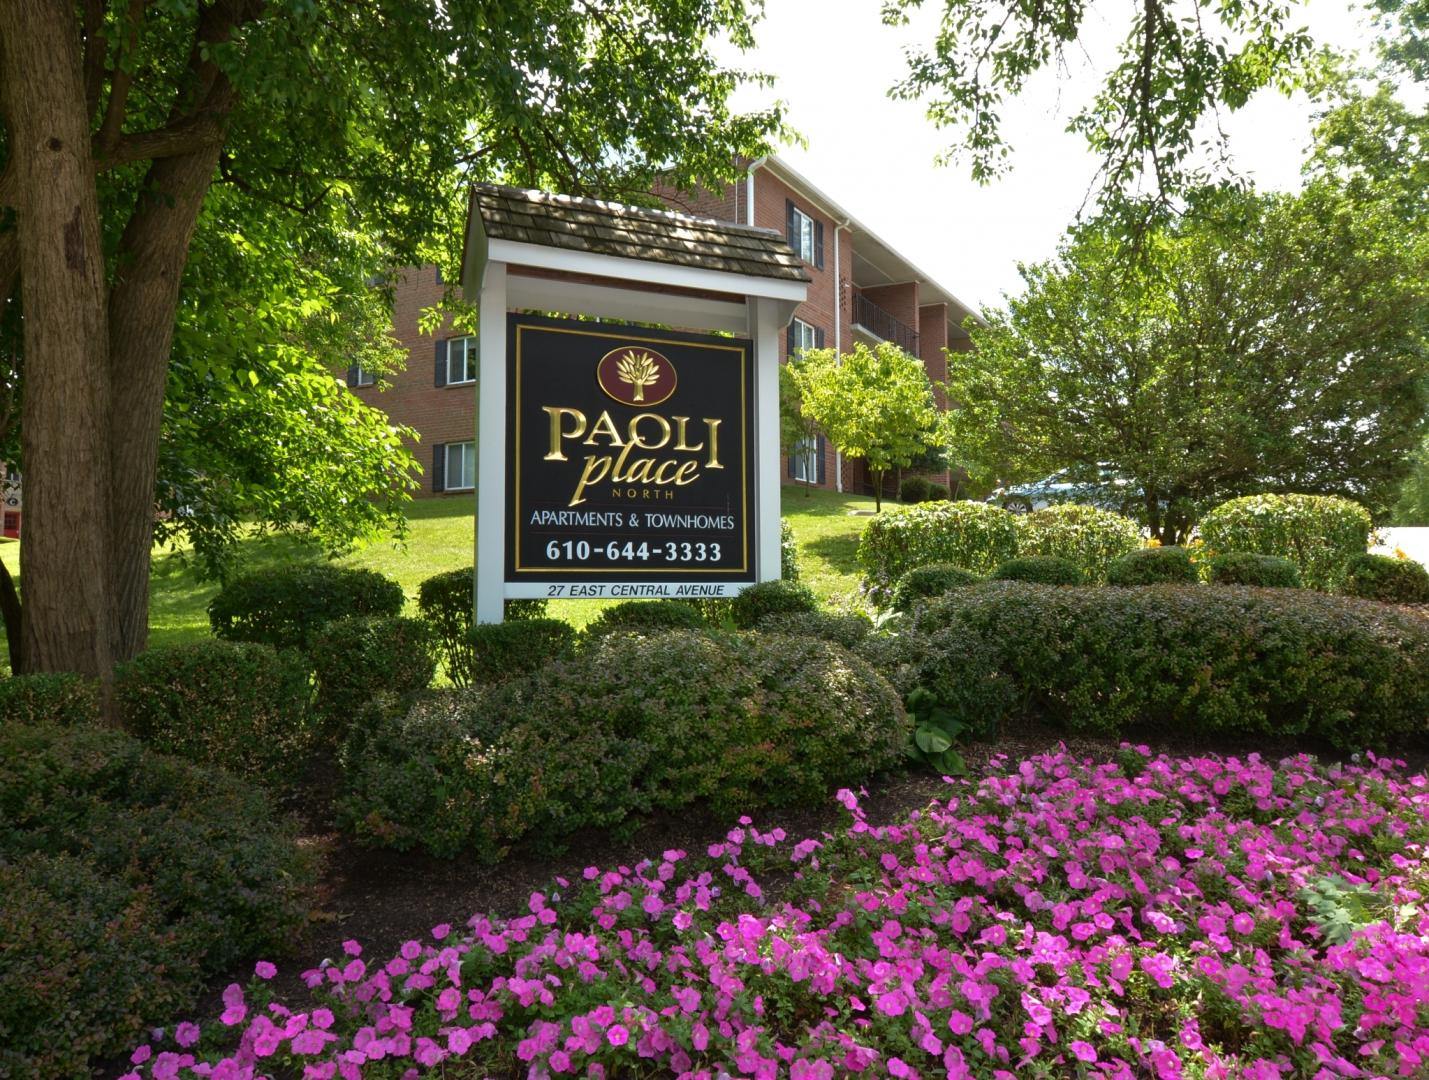 Paoli Apartments For Rent Paoli Place Apartments Townhomes Paoli Pa